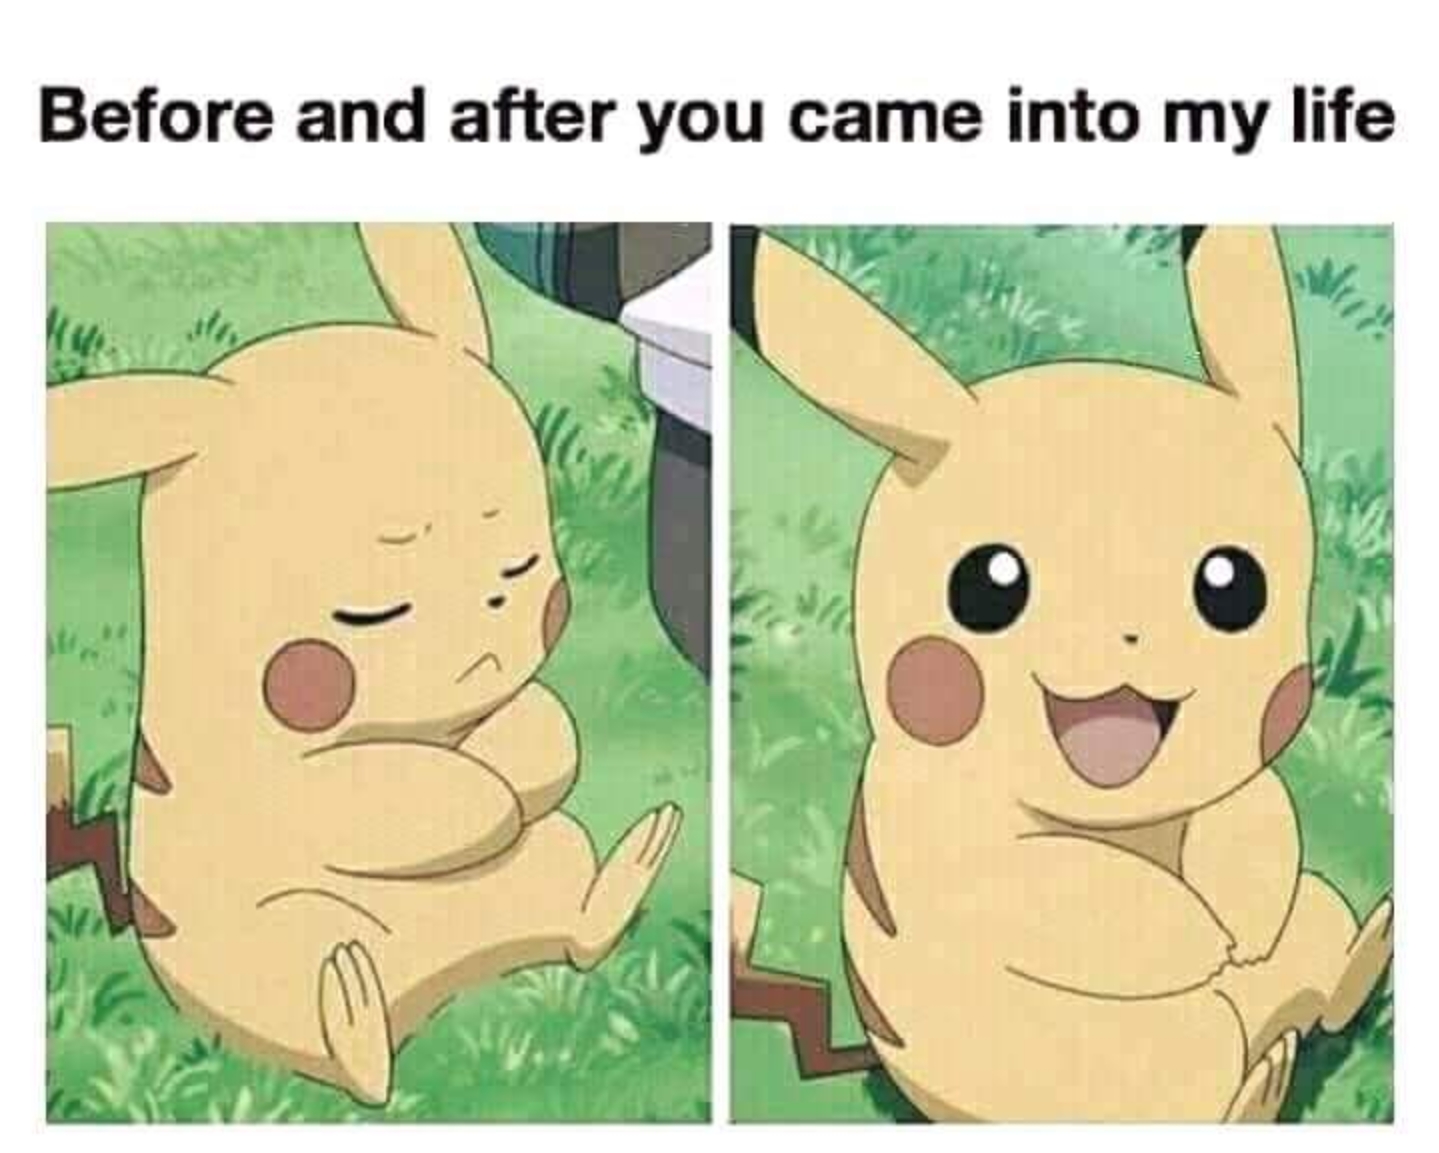 Cute Pikachu wholesome meme about a being a friend